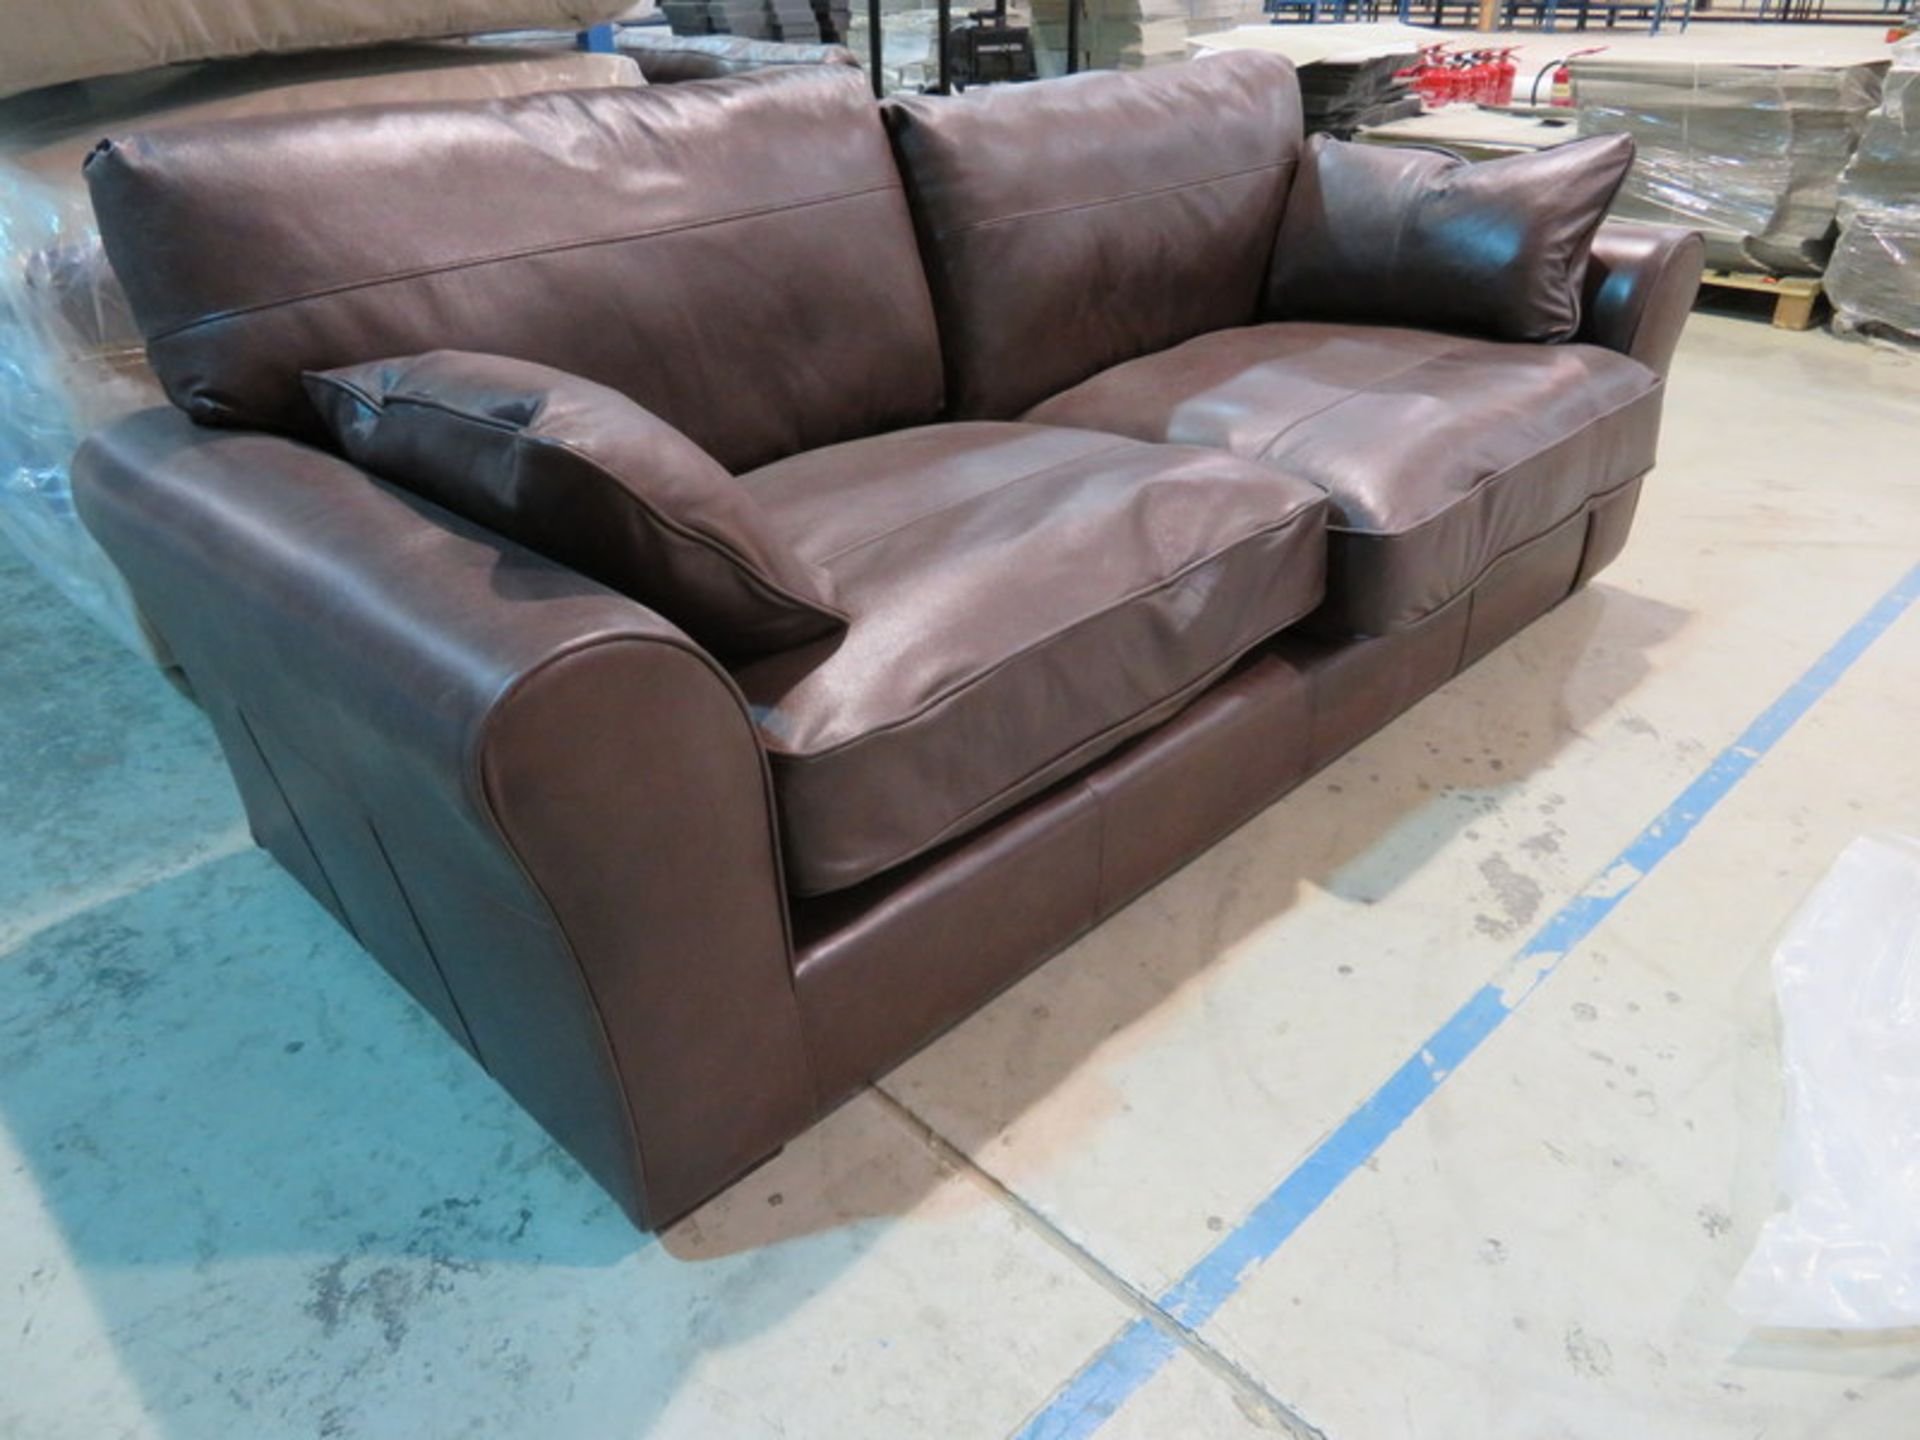 3 Seater Miracle brown 100% leather sofa. New in factory wrapping - 2200 x 970mm (LxD) - Image 2 of 4